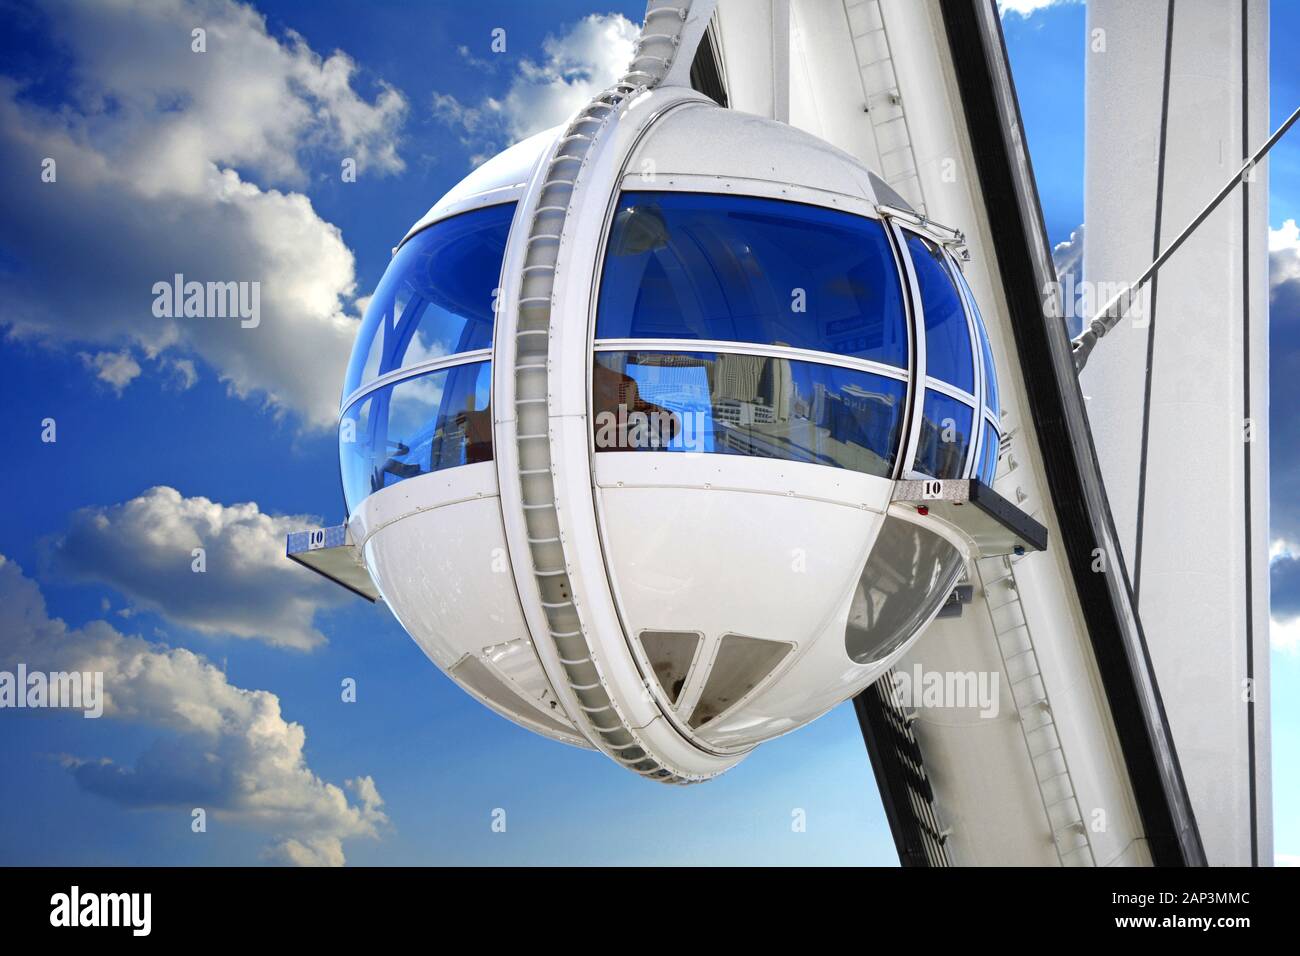 Las Vegas NV USA. 10-02-17 The High Roller is the tallest observation wheel in the world. Stock Photo